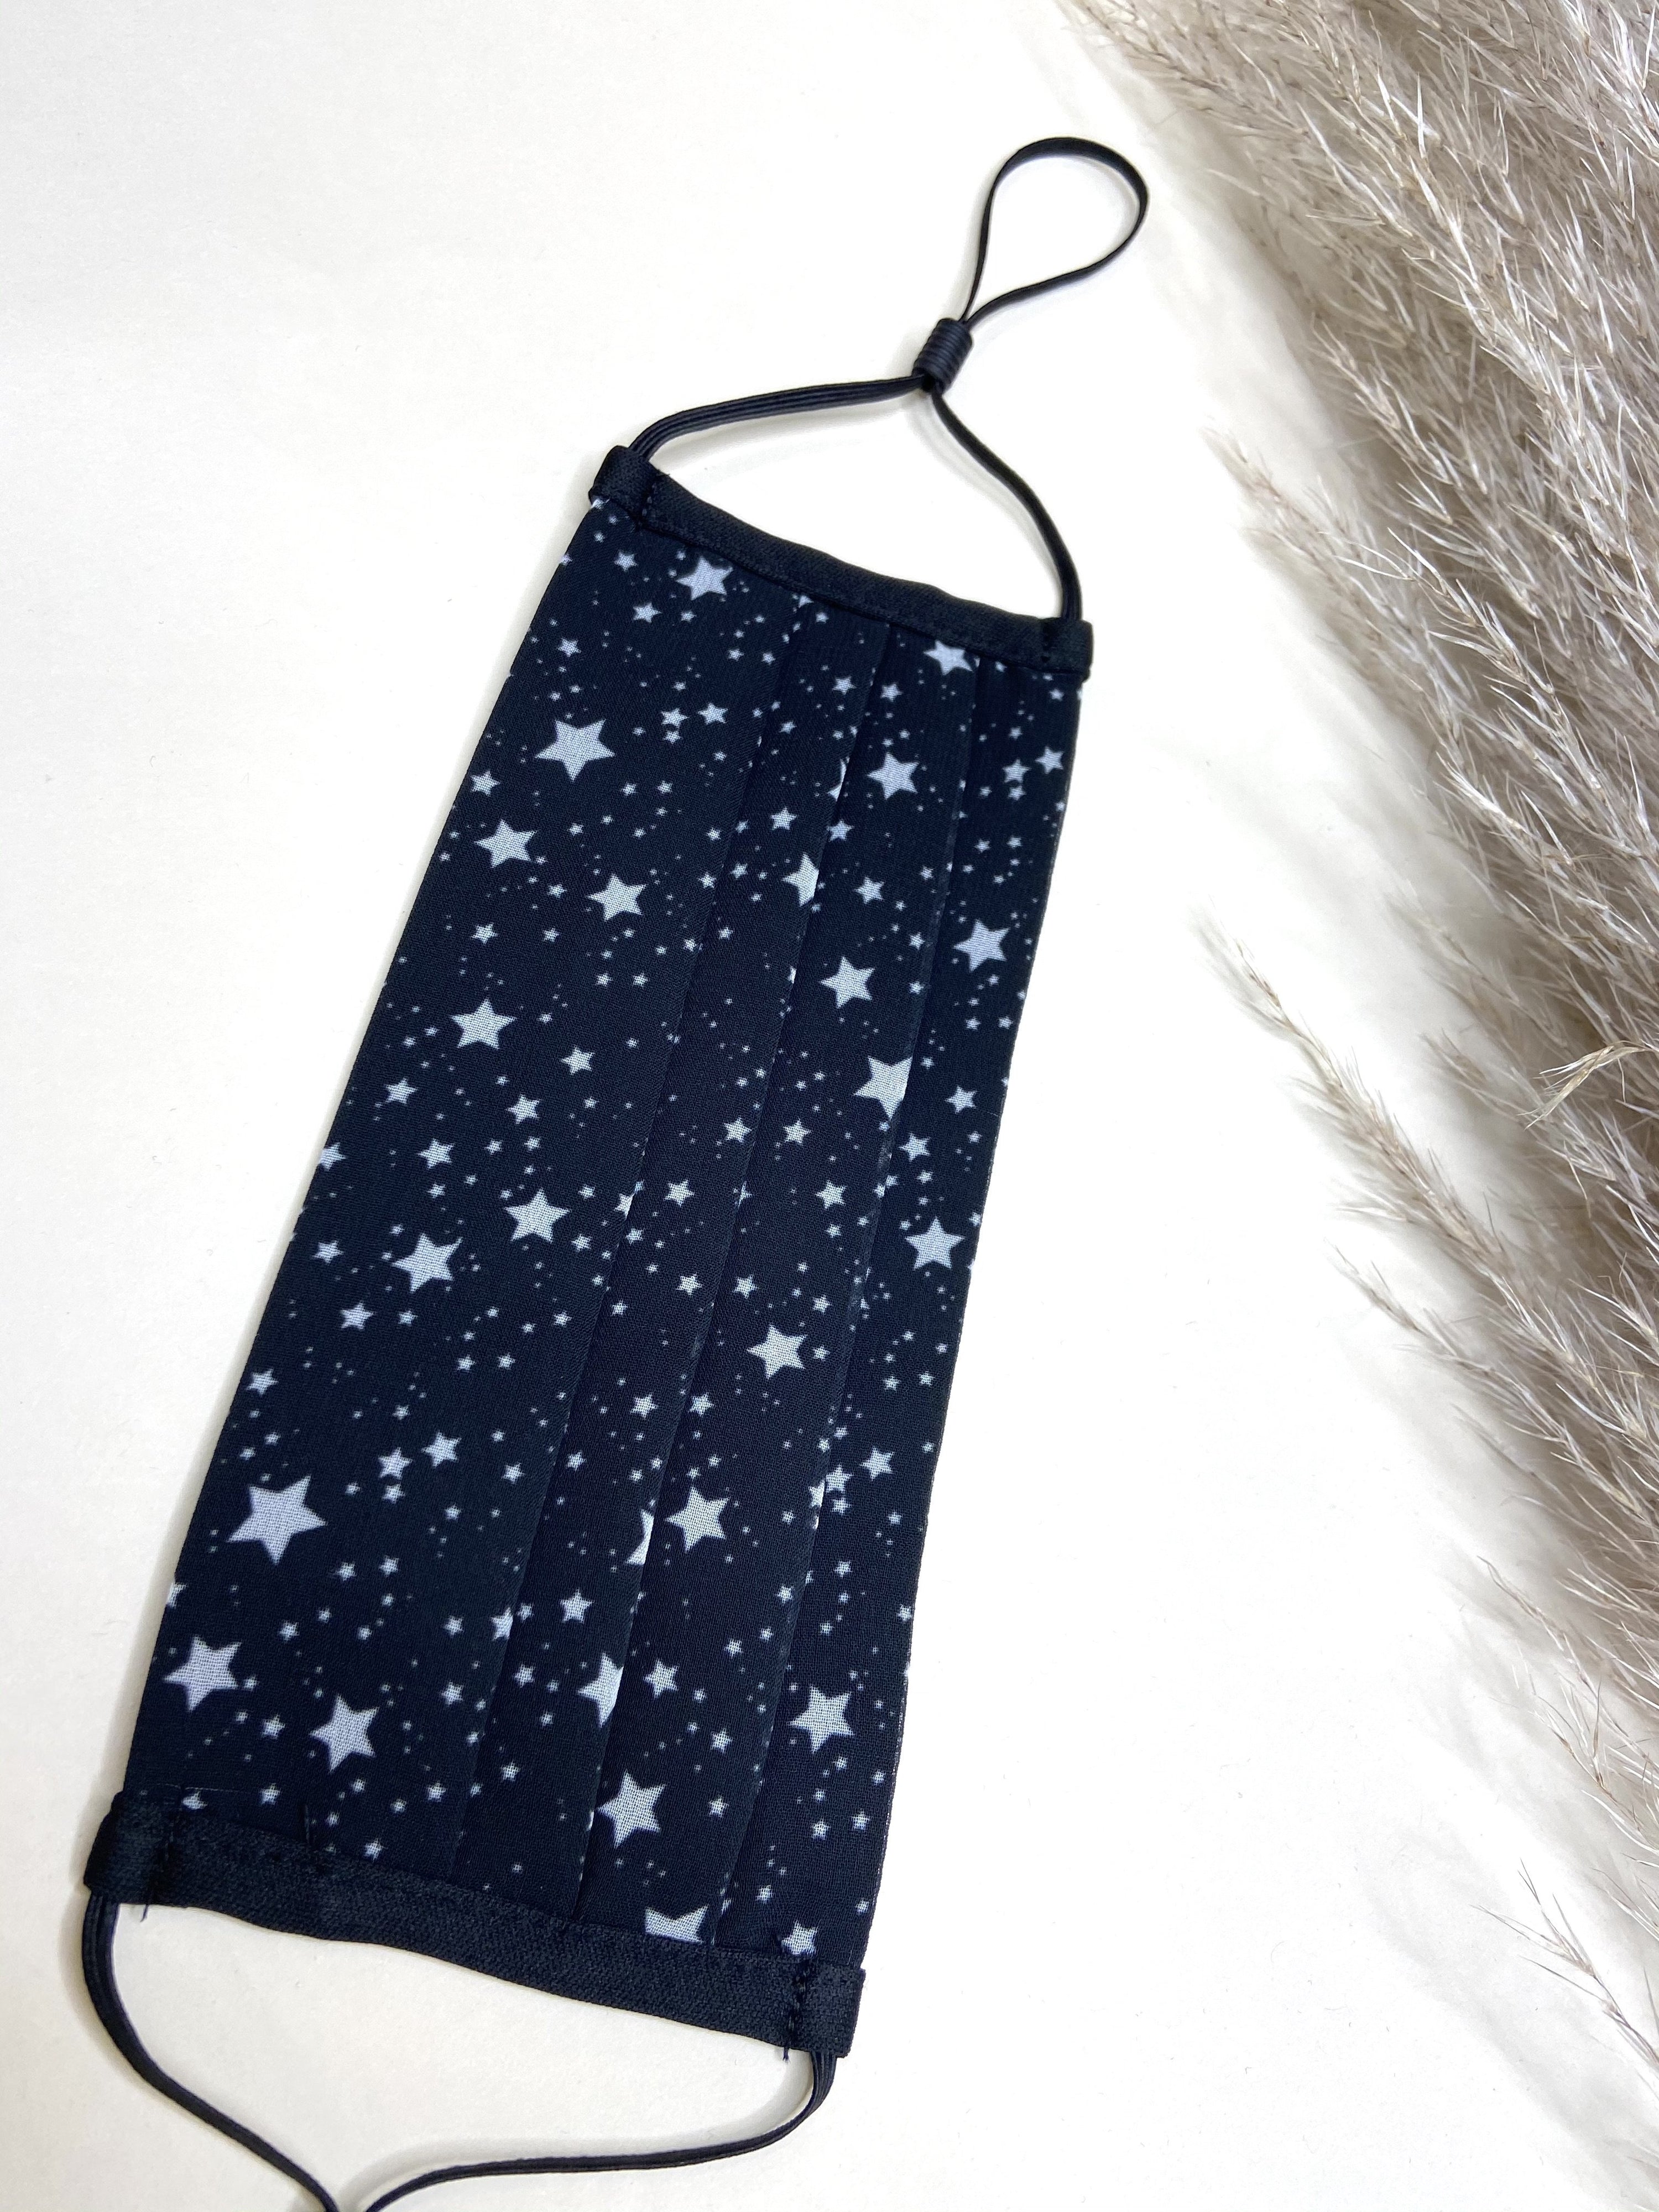 Star Print Washable Face Covering In Black and White - ADJUSTABLE